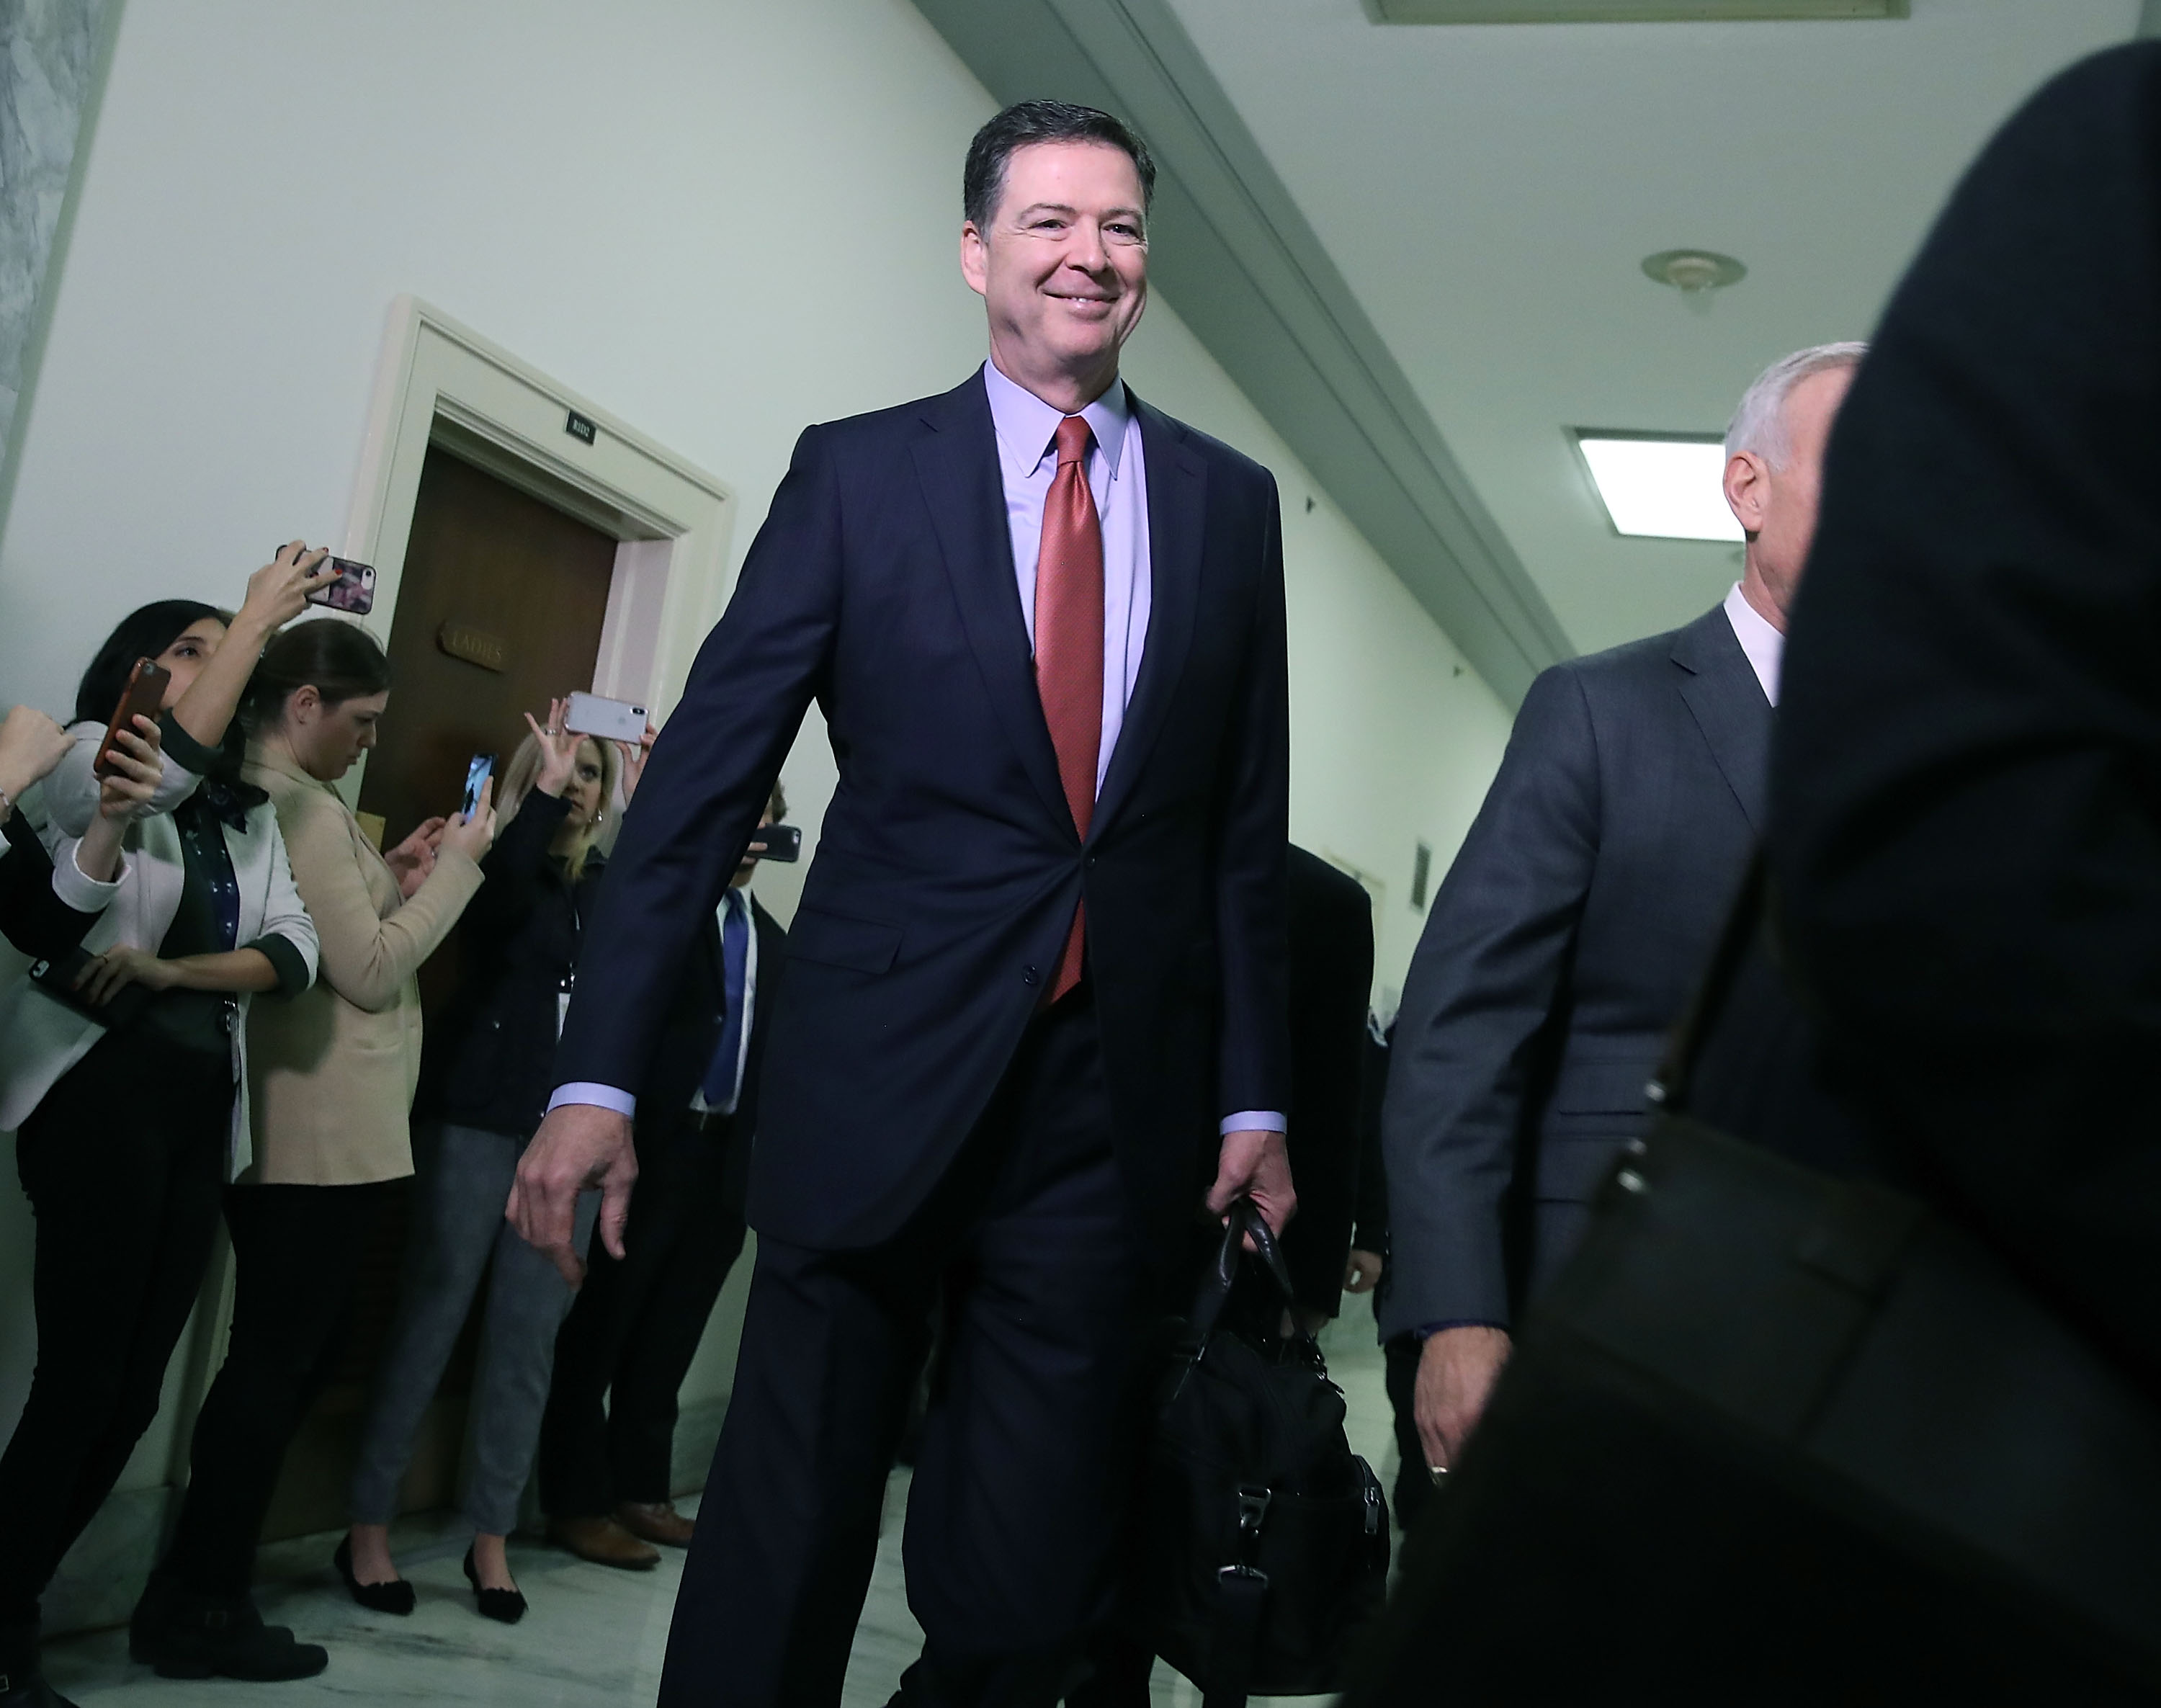 WASHINGTON, DC - DECEMBER 17: Former Federal Bureau of Investigation Director James Comey arrives at the Rayburn House Office Building before testifying to the House Judiciary and Oversight and Government Reform committees on Capitol Hill December 17, 2018 in Washington, DC. House Republicans subpoenaed Comey to testify behind closed doors for a second time about investigations into Hillary Clinton's email server and whether President Trump's campaign advisers colluded with the Russian government to steer the outcome of the 2016 presidential election. (Photo by Mark Wilson/Getty Images)